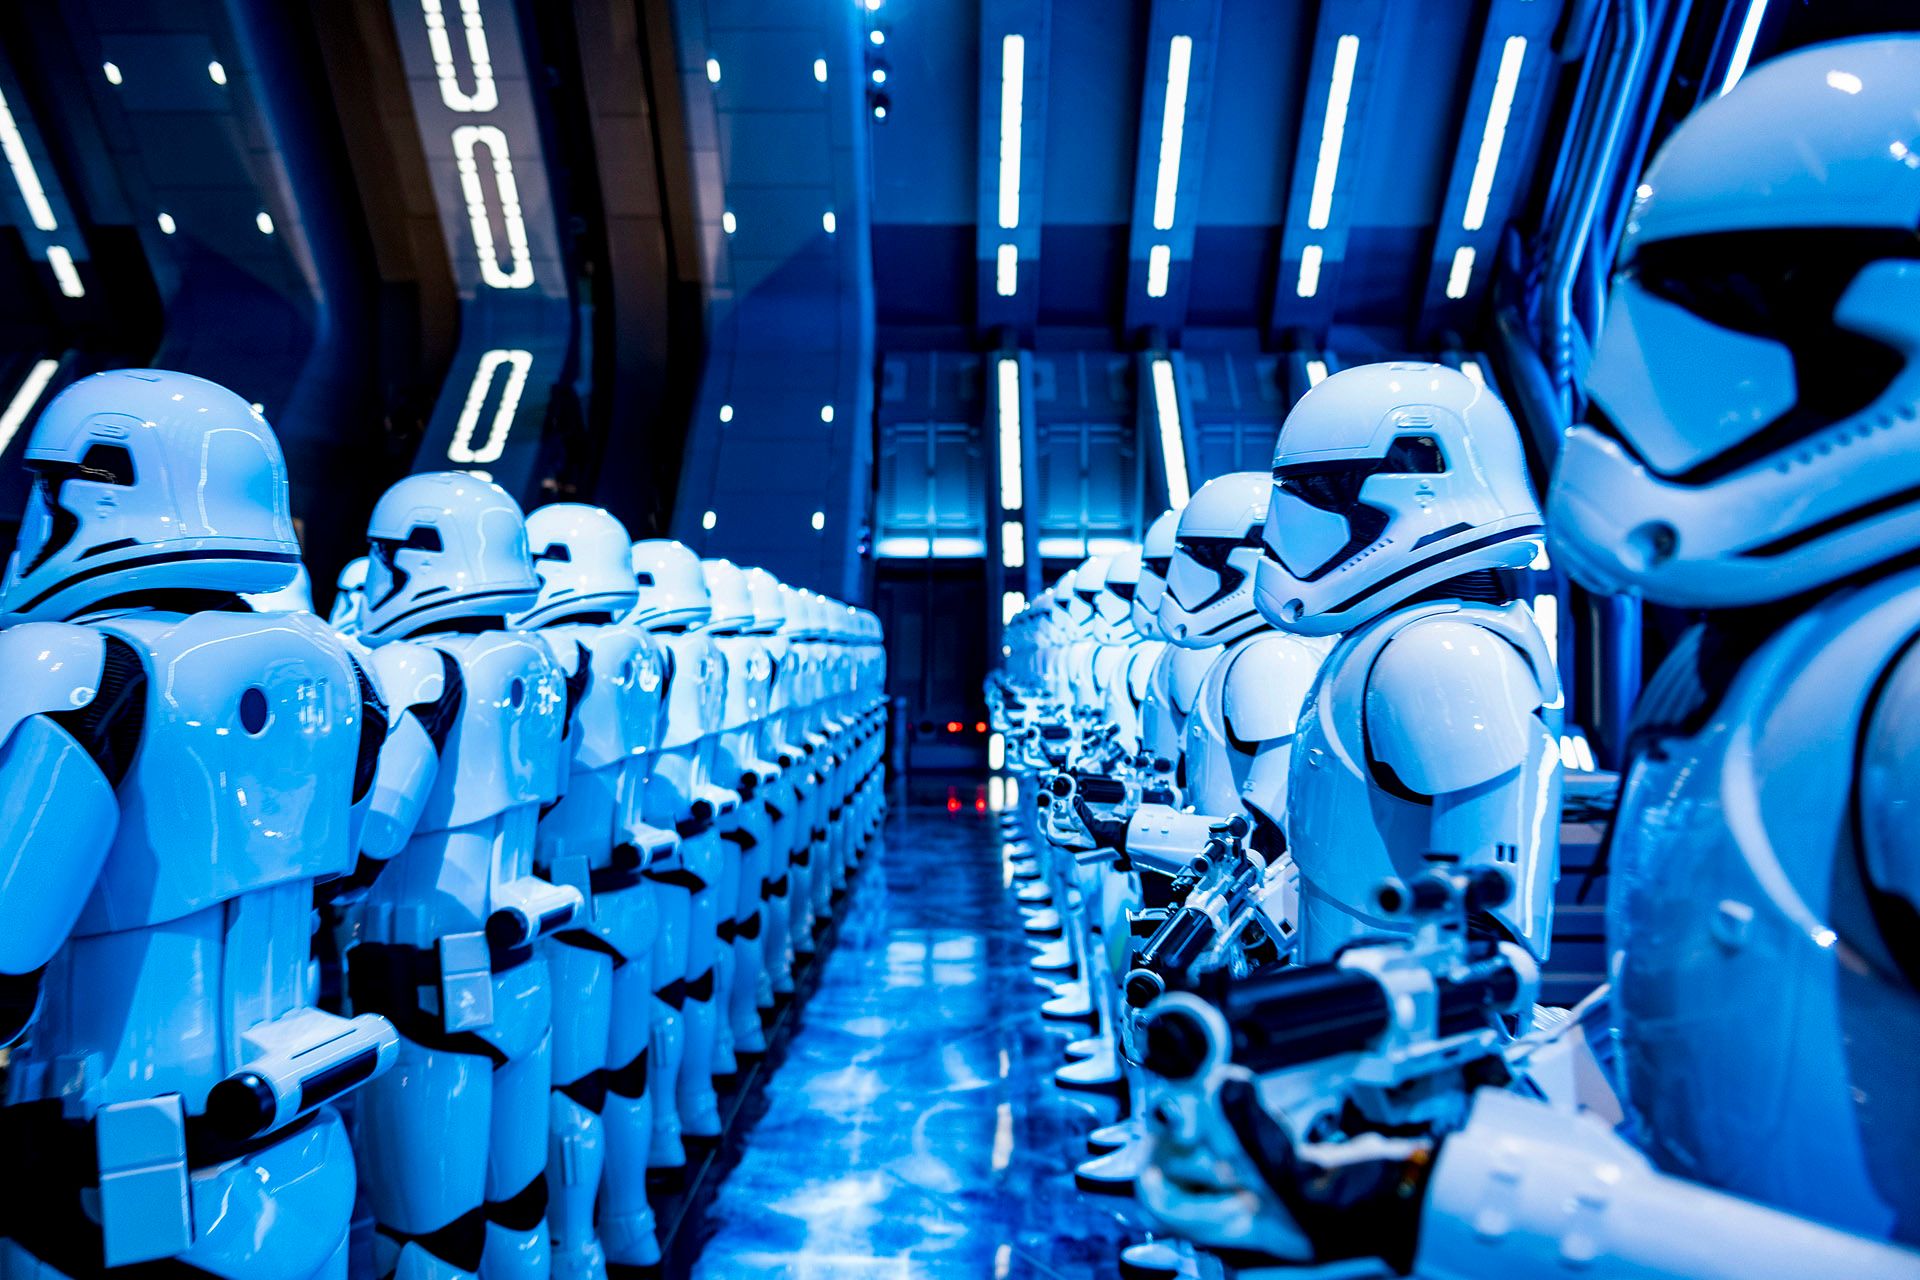 Stormtroopers in Star Wars: Rise of the Resistance